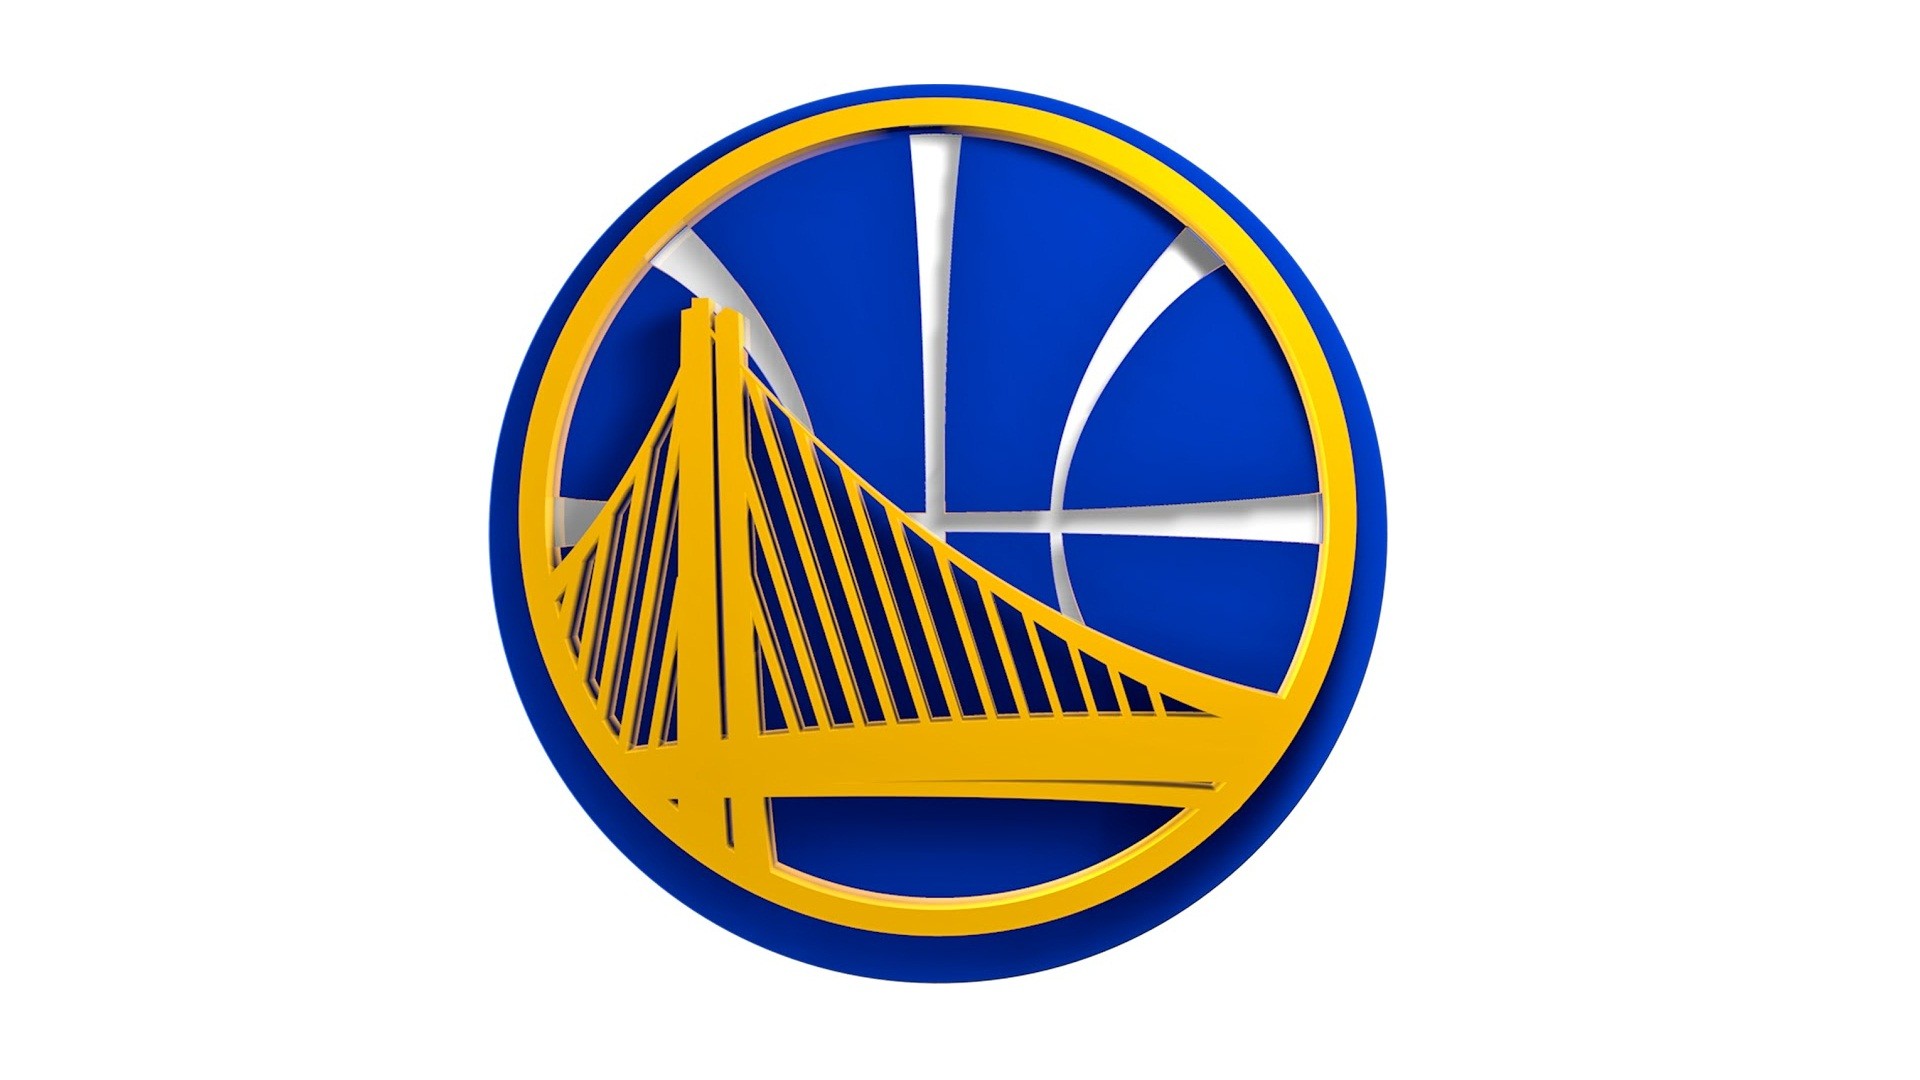 Golden State Warriors Logo Wallpaper For Mac Backgrounds with image dimensions 1920x1080 pixel. You can make this wallpaper for your Desktop Computer Backgrounds, Windows or Mac Screensavers, iPhone Lock screen, Tablet or Android and another Mobile Phone device